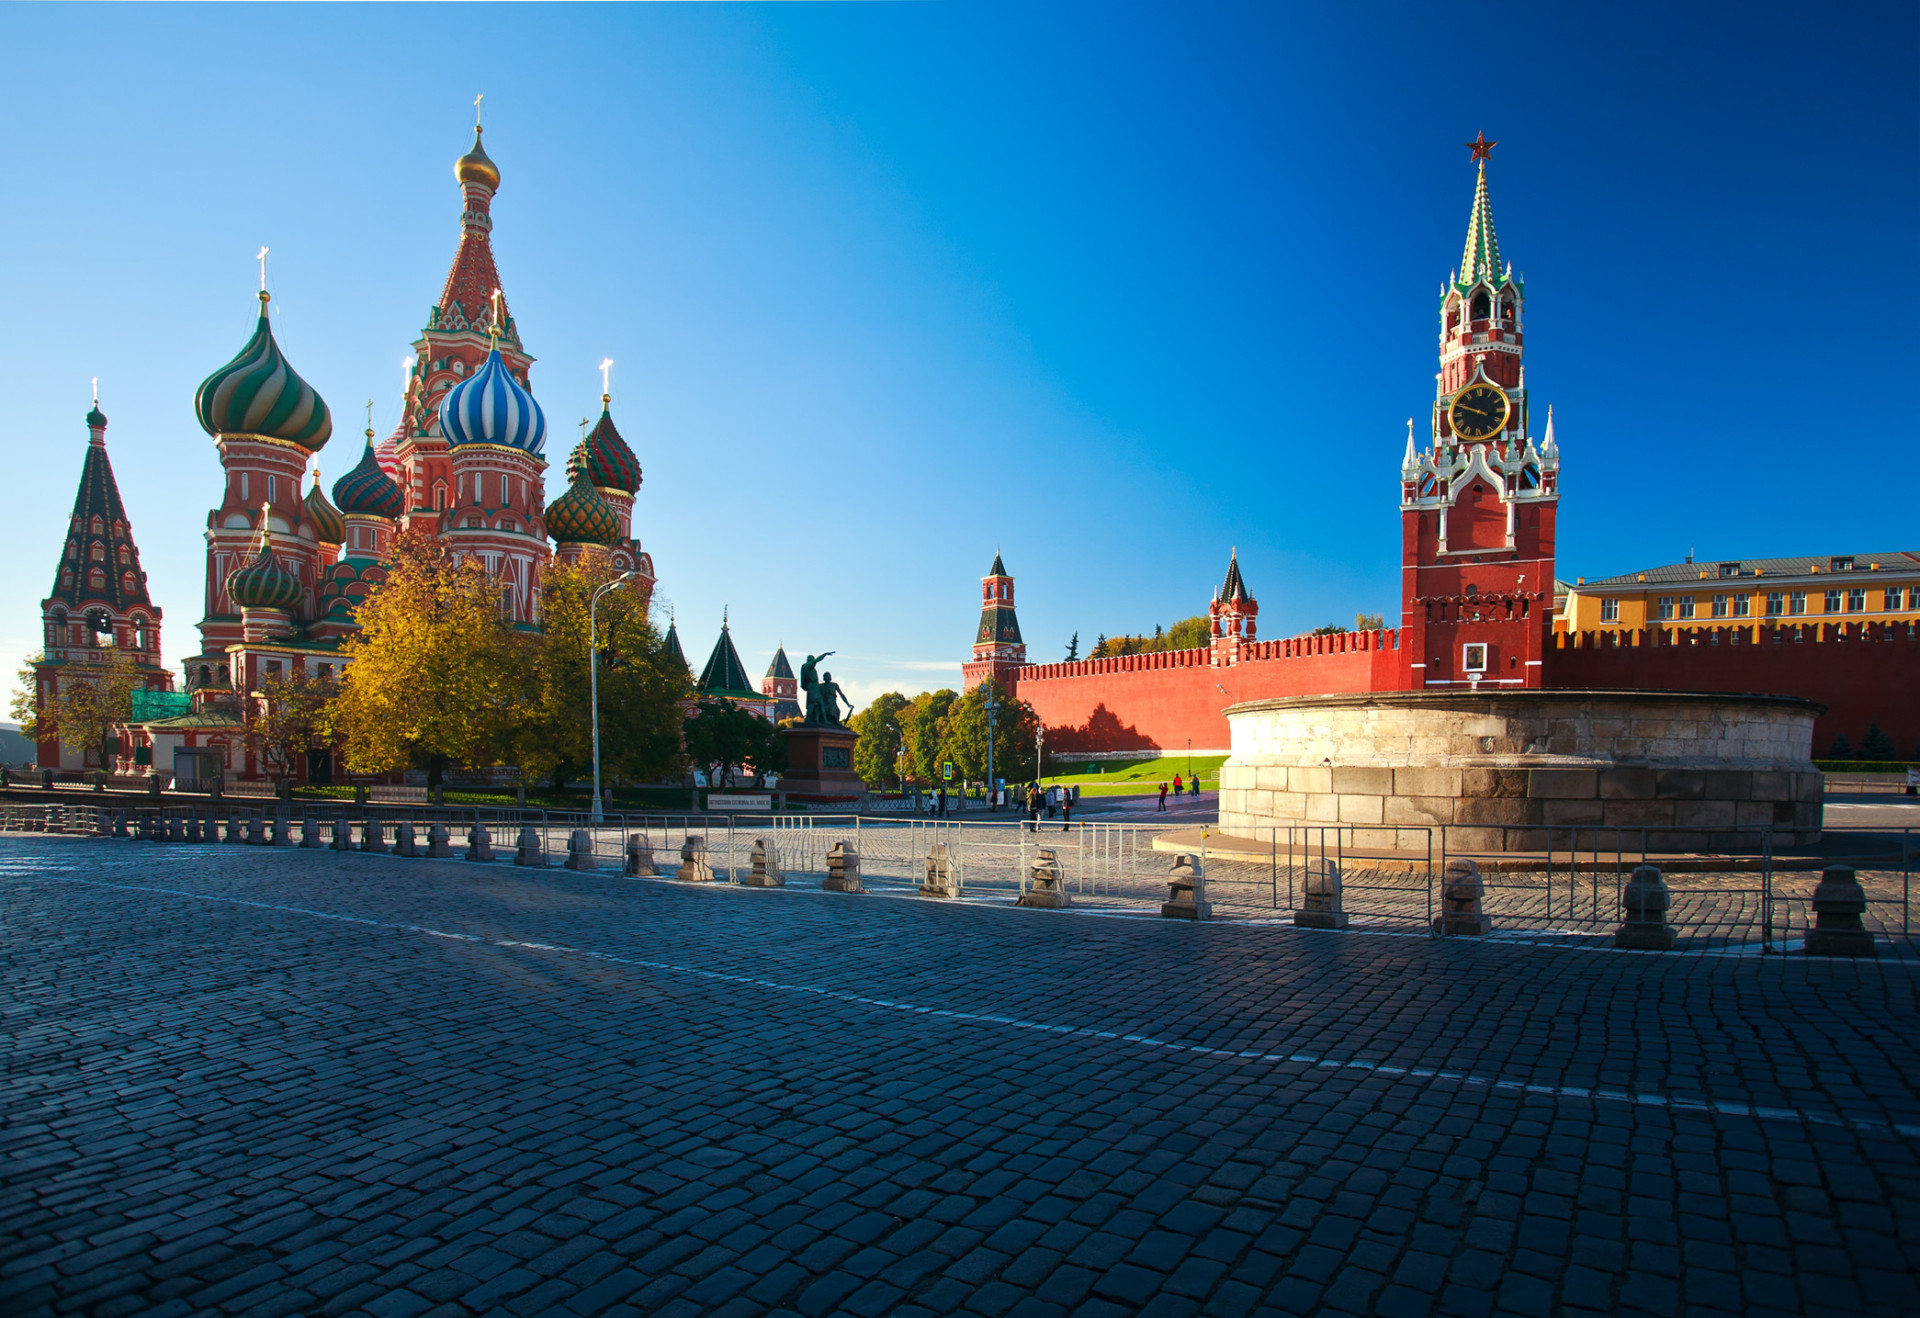 <p>Moscow remains a hugely important city. And the monuments are still reason enough to visit Red Square.</p> <p>See also: <a href="https://www.msn.com/en-us/news/other/kicking-off-in-qatar/ss-AAZwHpt"><span>Kicking off in Qatar</span></a></p> <p><span>Follow us on </span><a href="https://www.msn.com/en-us/community/channel/vid-7xx8mnucu55yw63we9va2gwr7uihbxwc68fxqp25x6tg4ftibpra"><span>MSN</span></a></p>